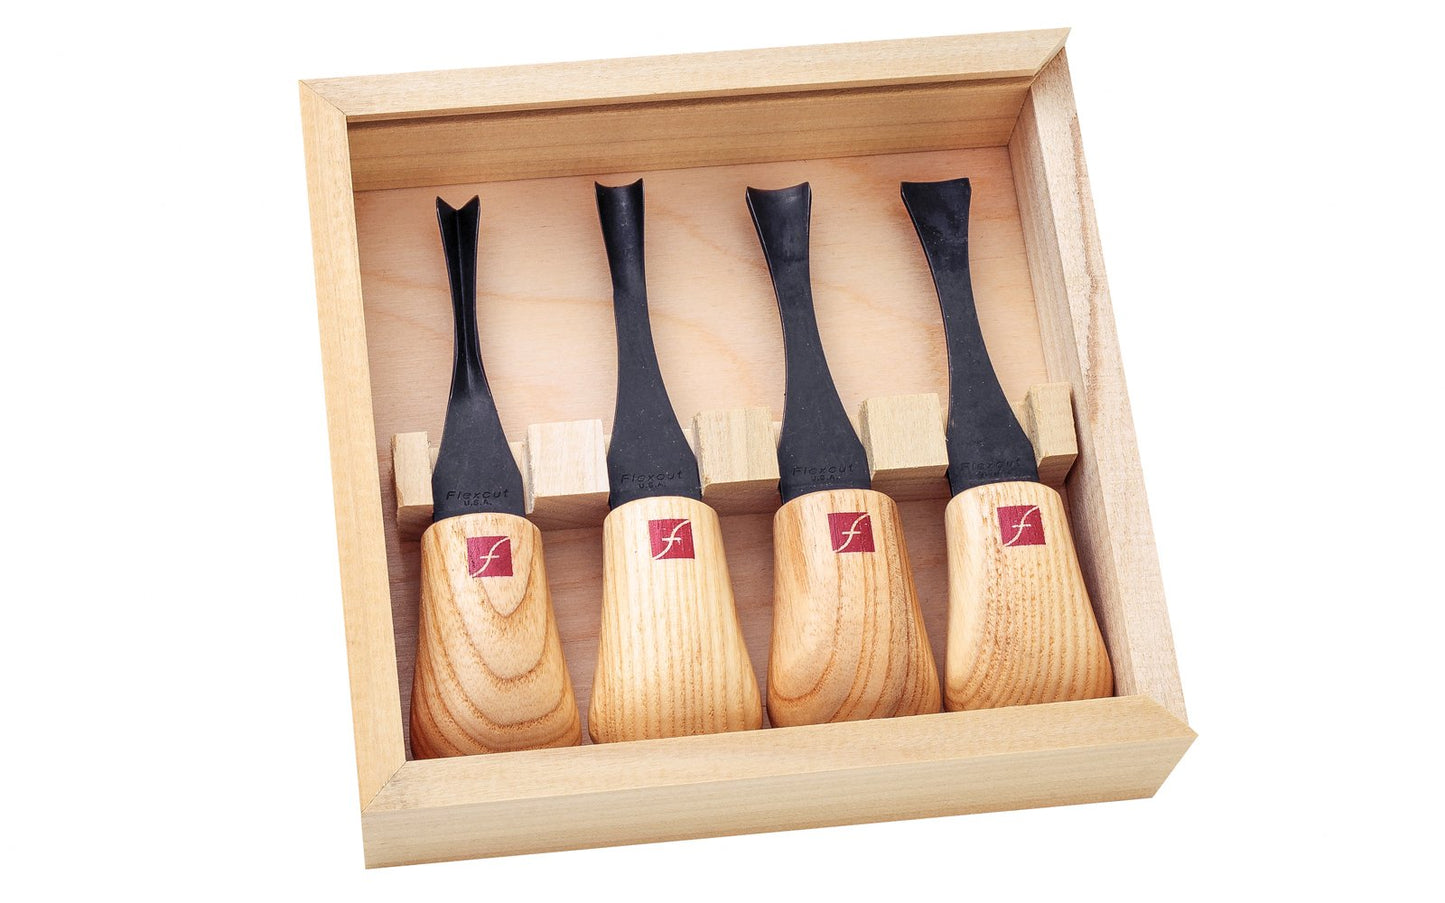 Flexcut Wide Palm Carving Set ~ FR404 - 4-piece set - Includes Sweep #3 x 5/8" (16 mm), Sweep #5 x 9/16" (14 mm), Gouge #8 x 3/8" (10 mm), Parting V-Tool 70° x 3/8" (9mm) - High Carbon Steel blades - Ash wood handles - Palm Carving Tool Set - Made in USA ~ 651646004046